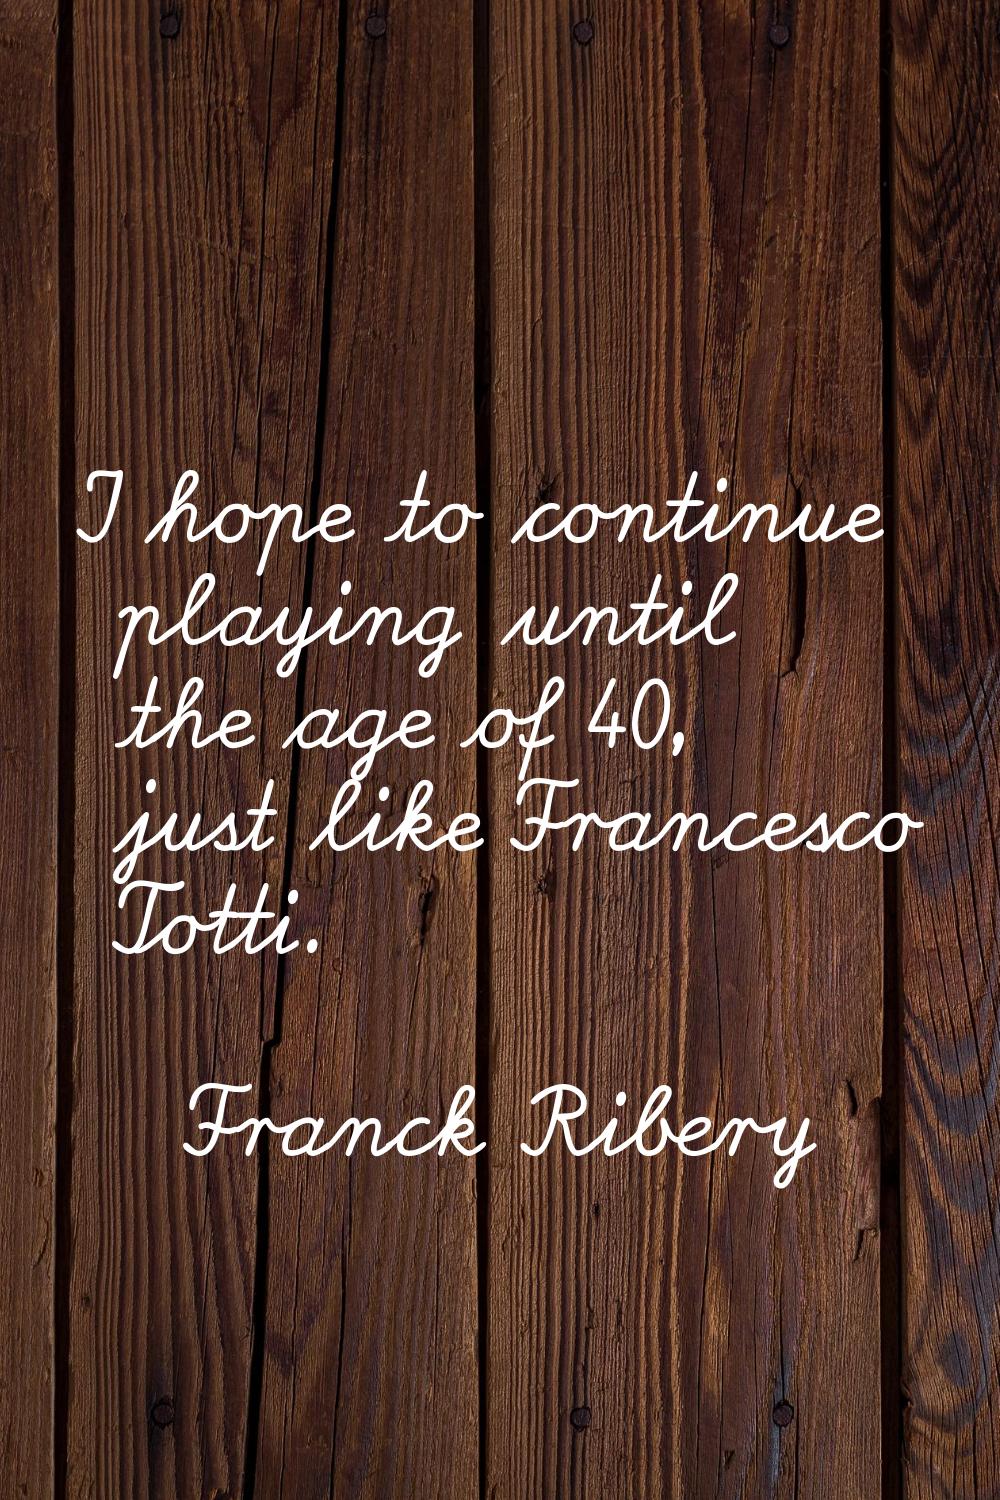 I hope to continue playing until the age of 40, just like Francesco Totti.